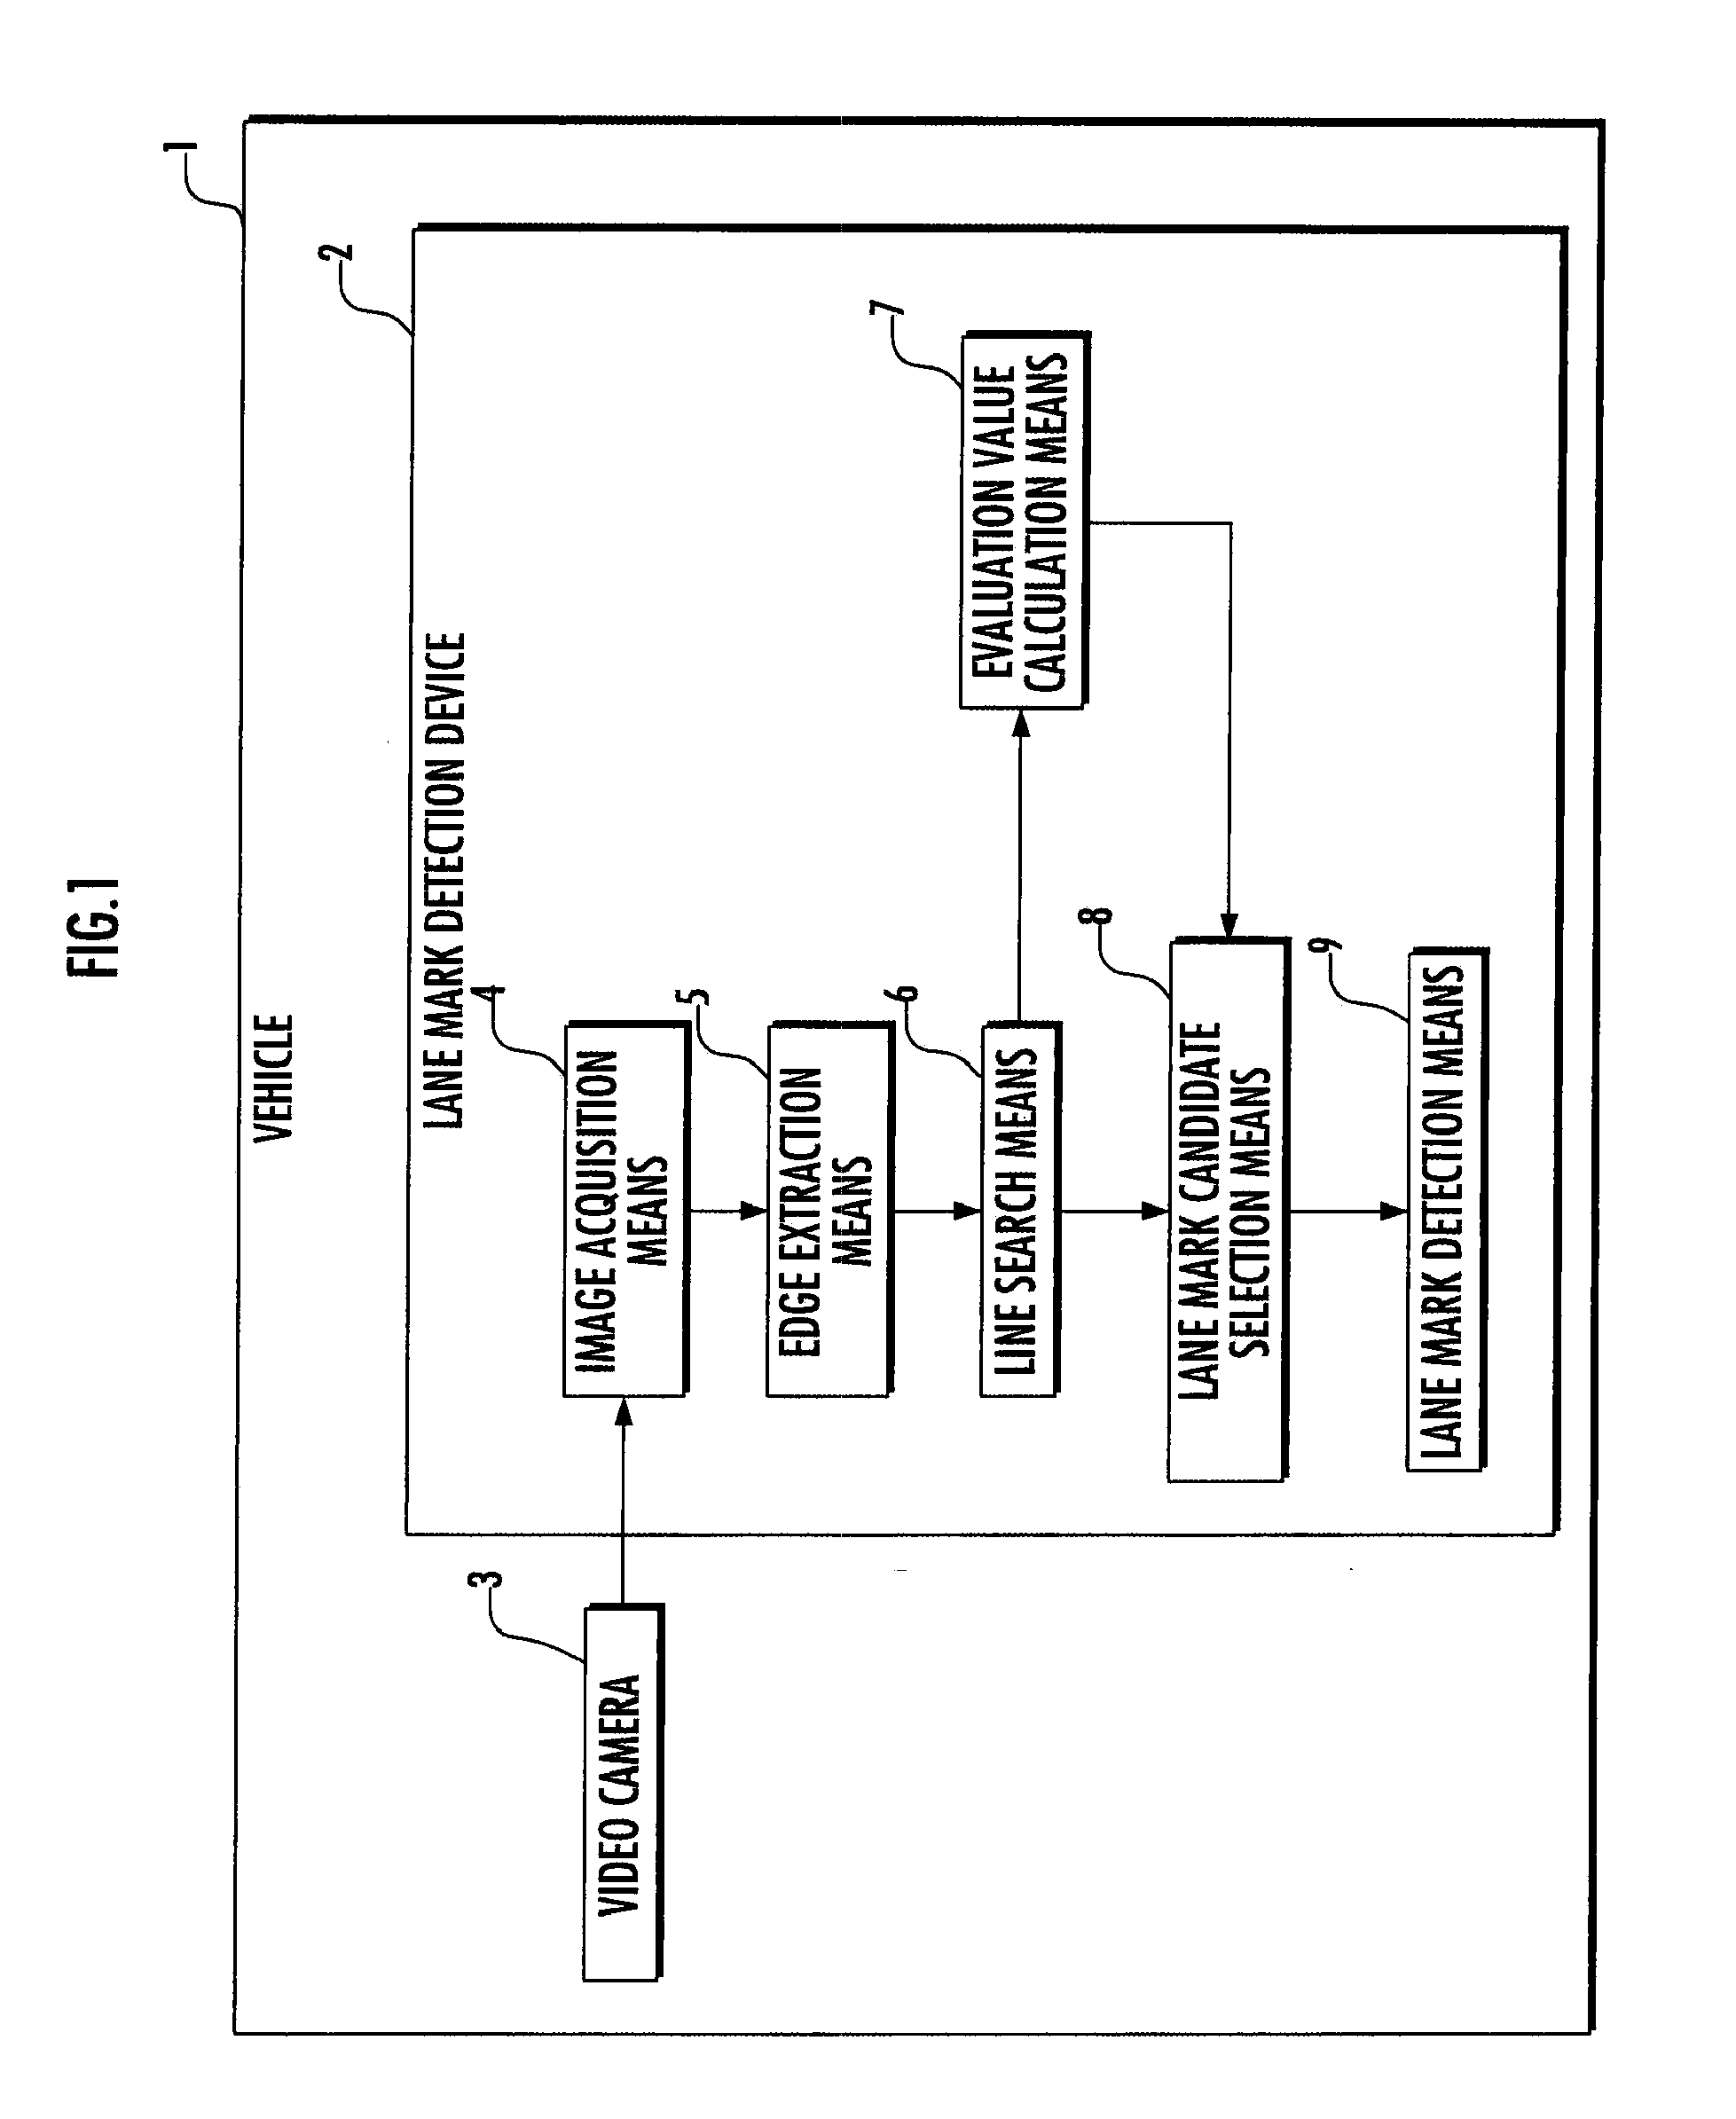 Vehicle and Lane Mark Detection Device